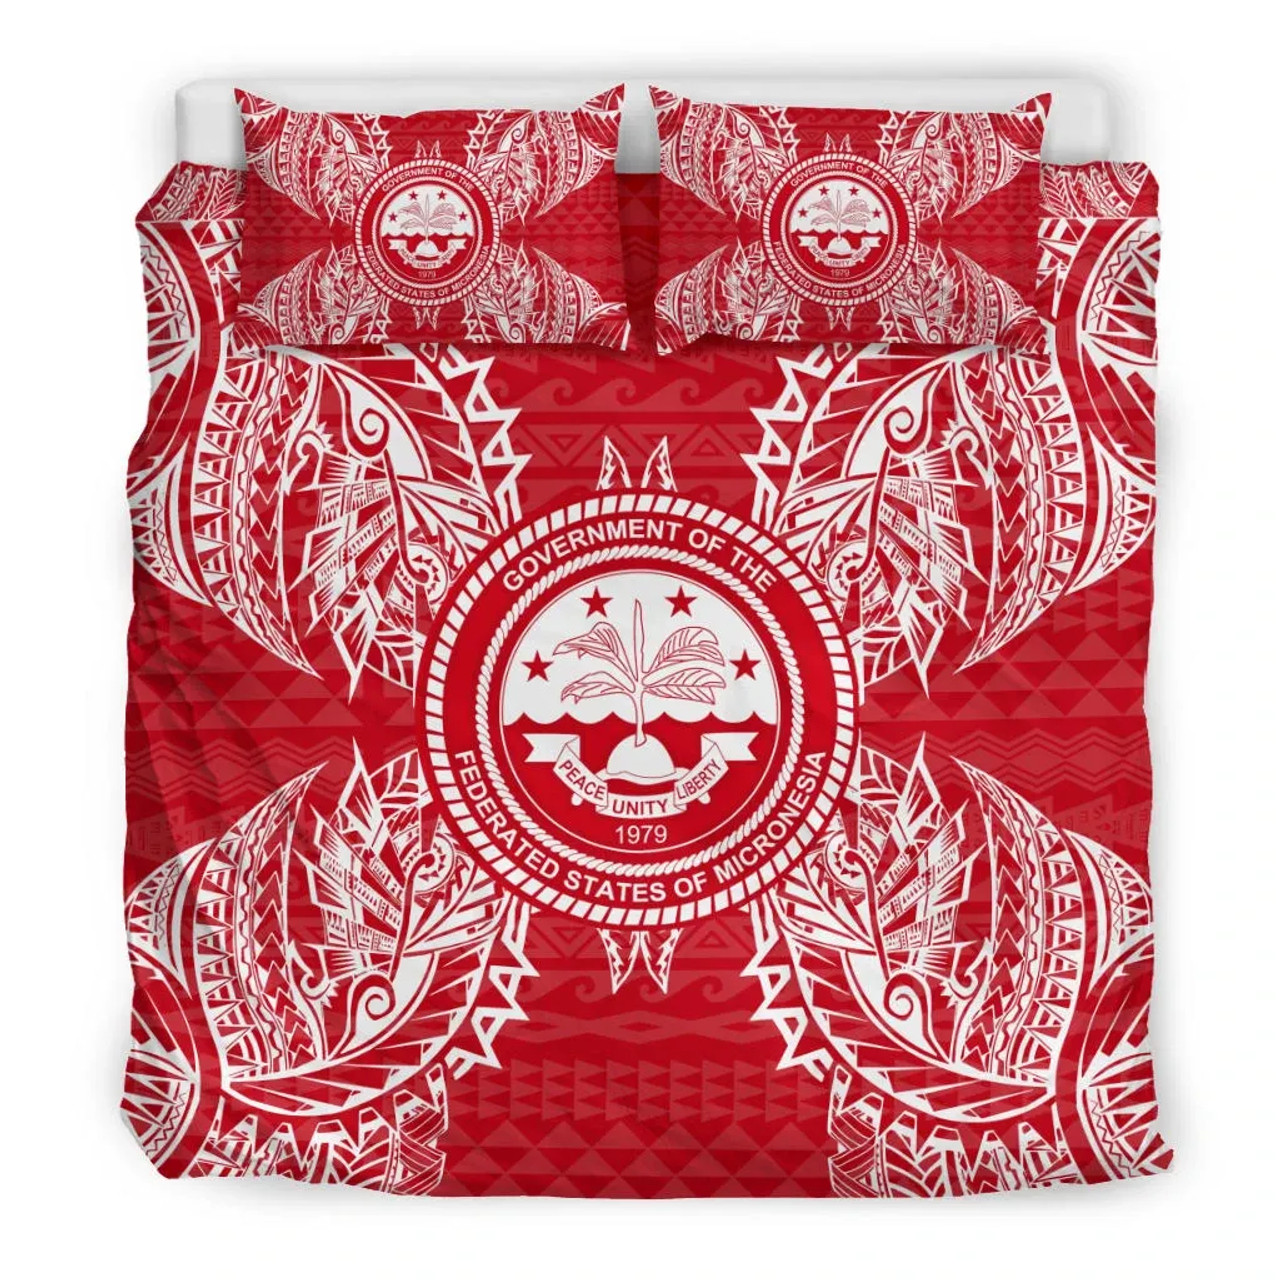 Polynesian Bedding Set - Federated States Of Micronesian Duvet Cover Set Map Red White 3